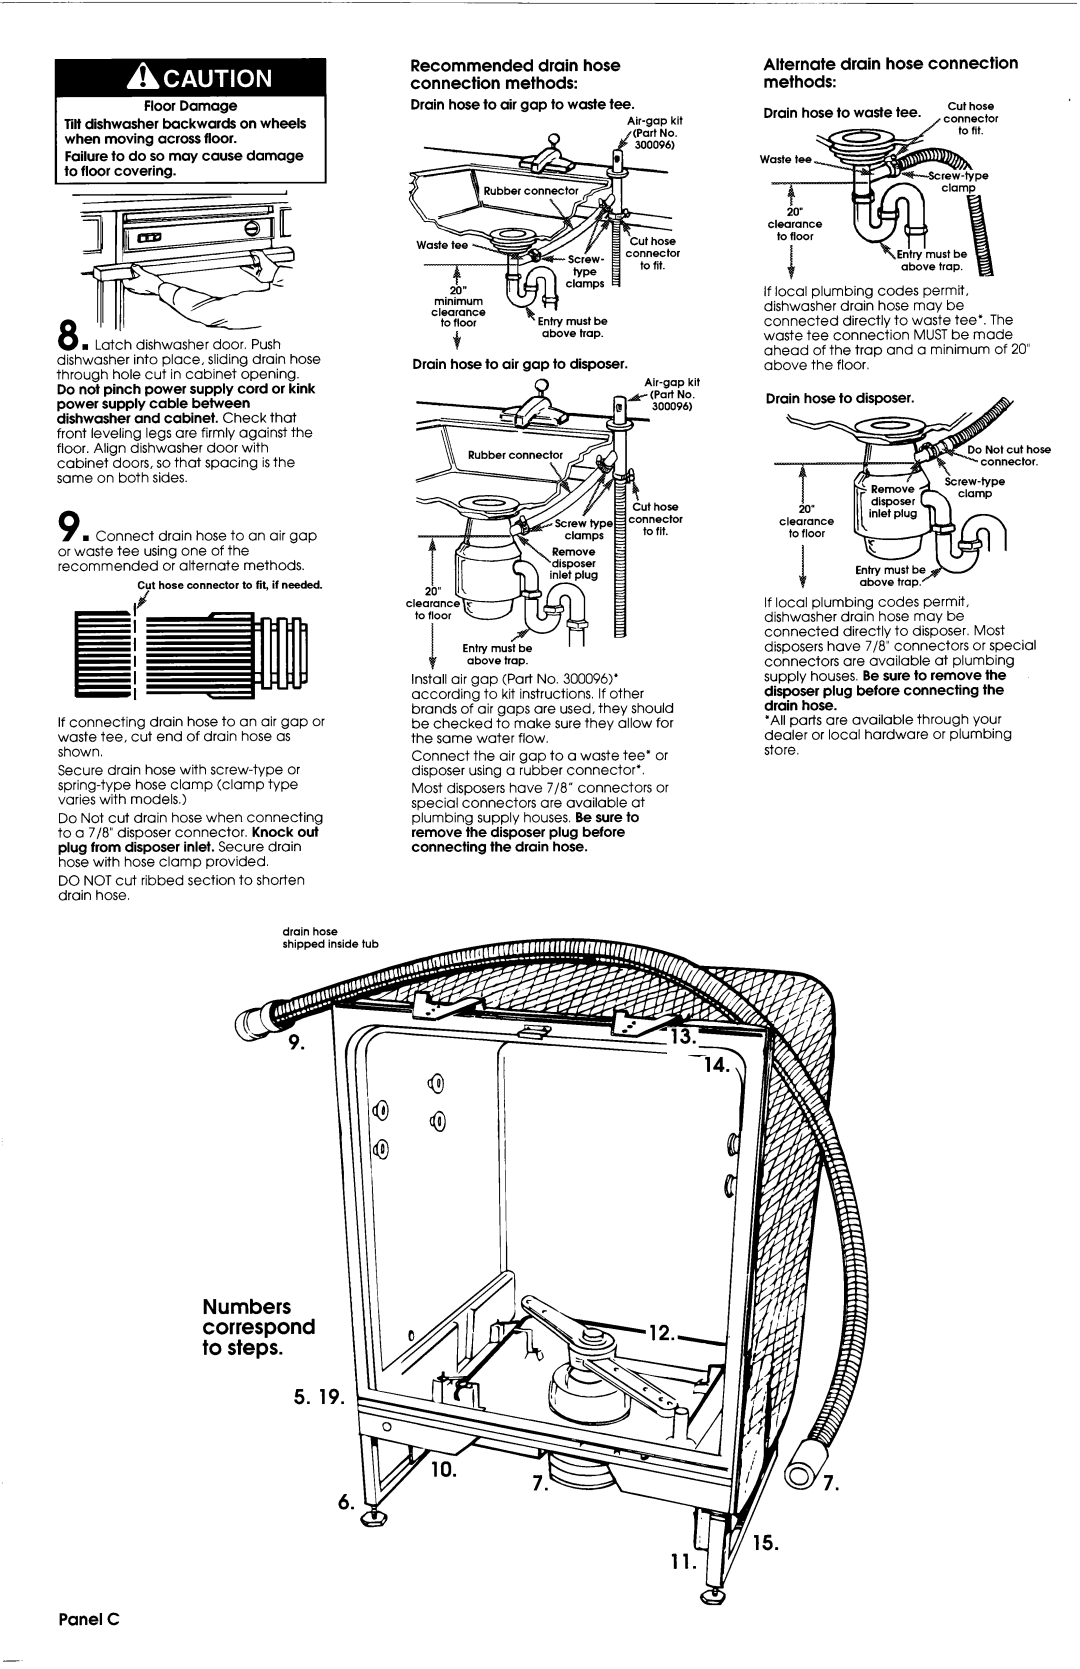 Whirlpool 3369092 REV. A Numbers correspond to steps, Recommended drain hose connection methods, Panel C 